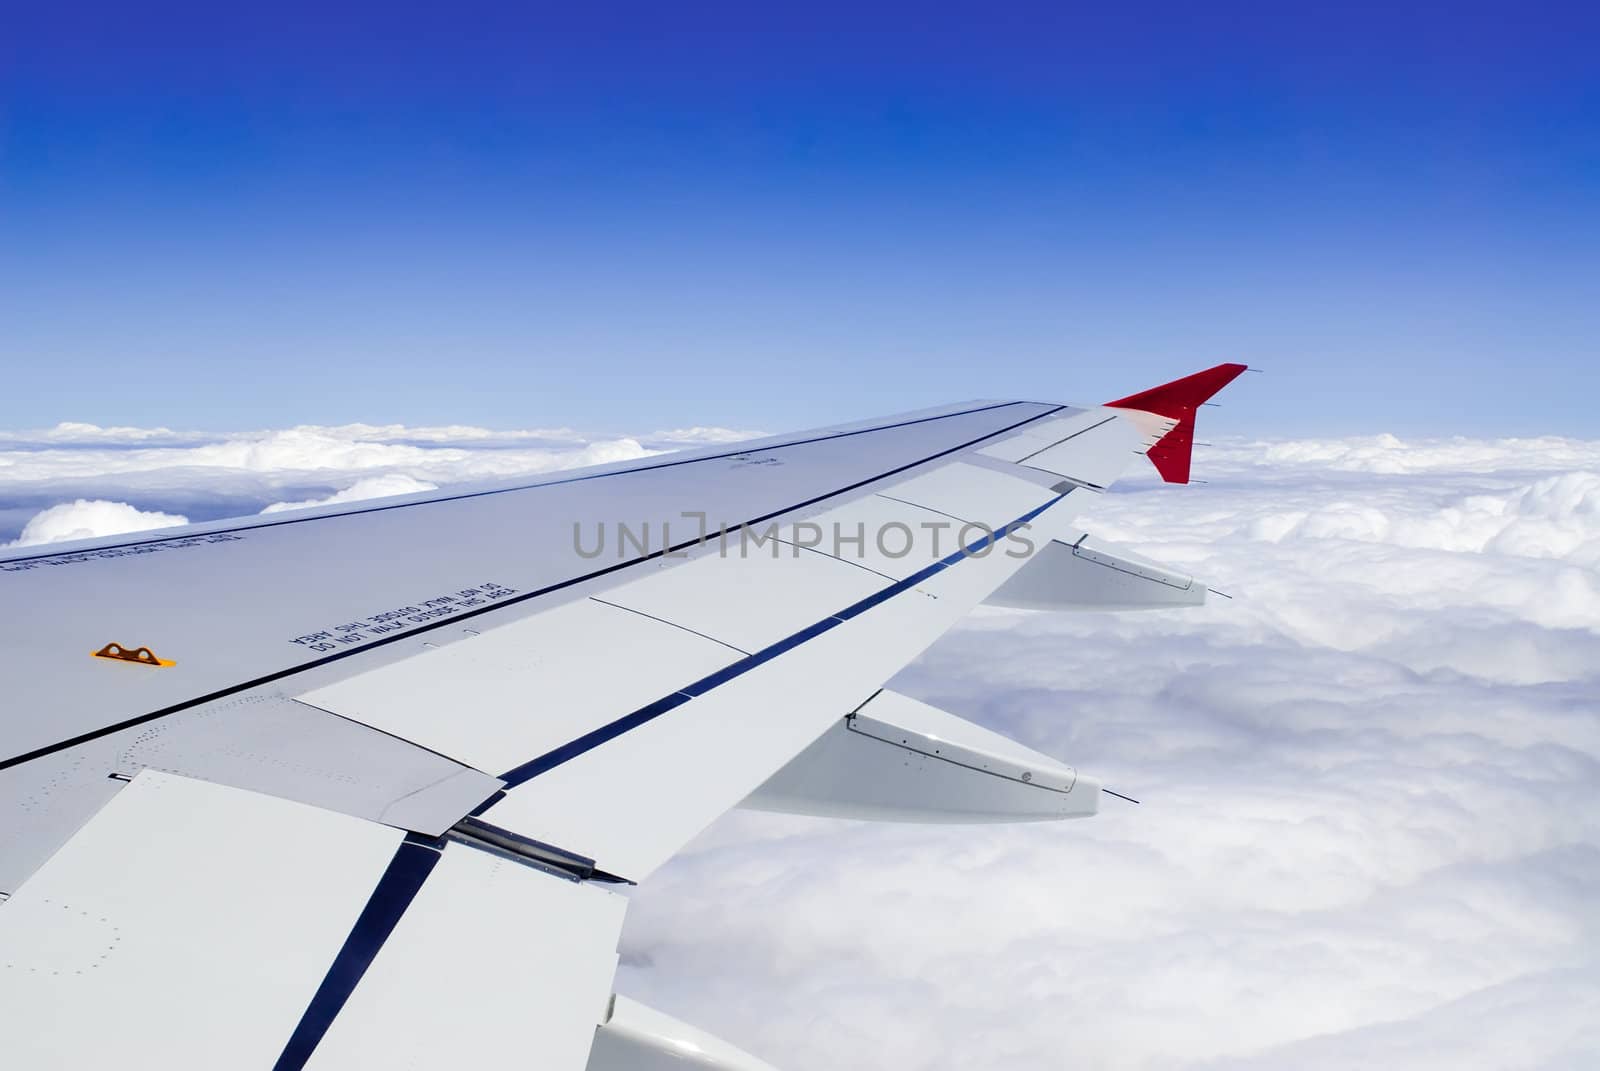 a view though an airplane window where one can see the wing and beautiful cloudy sky